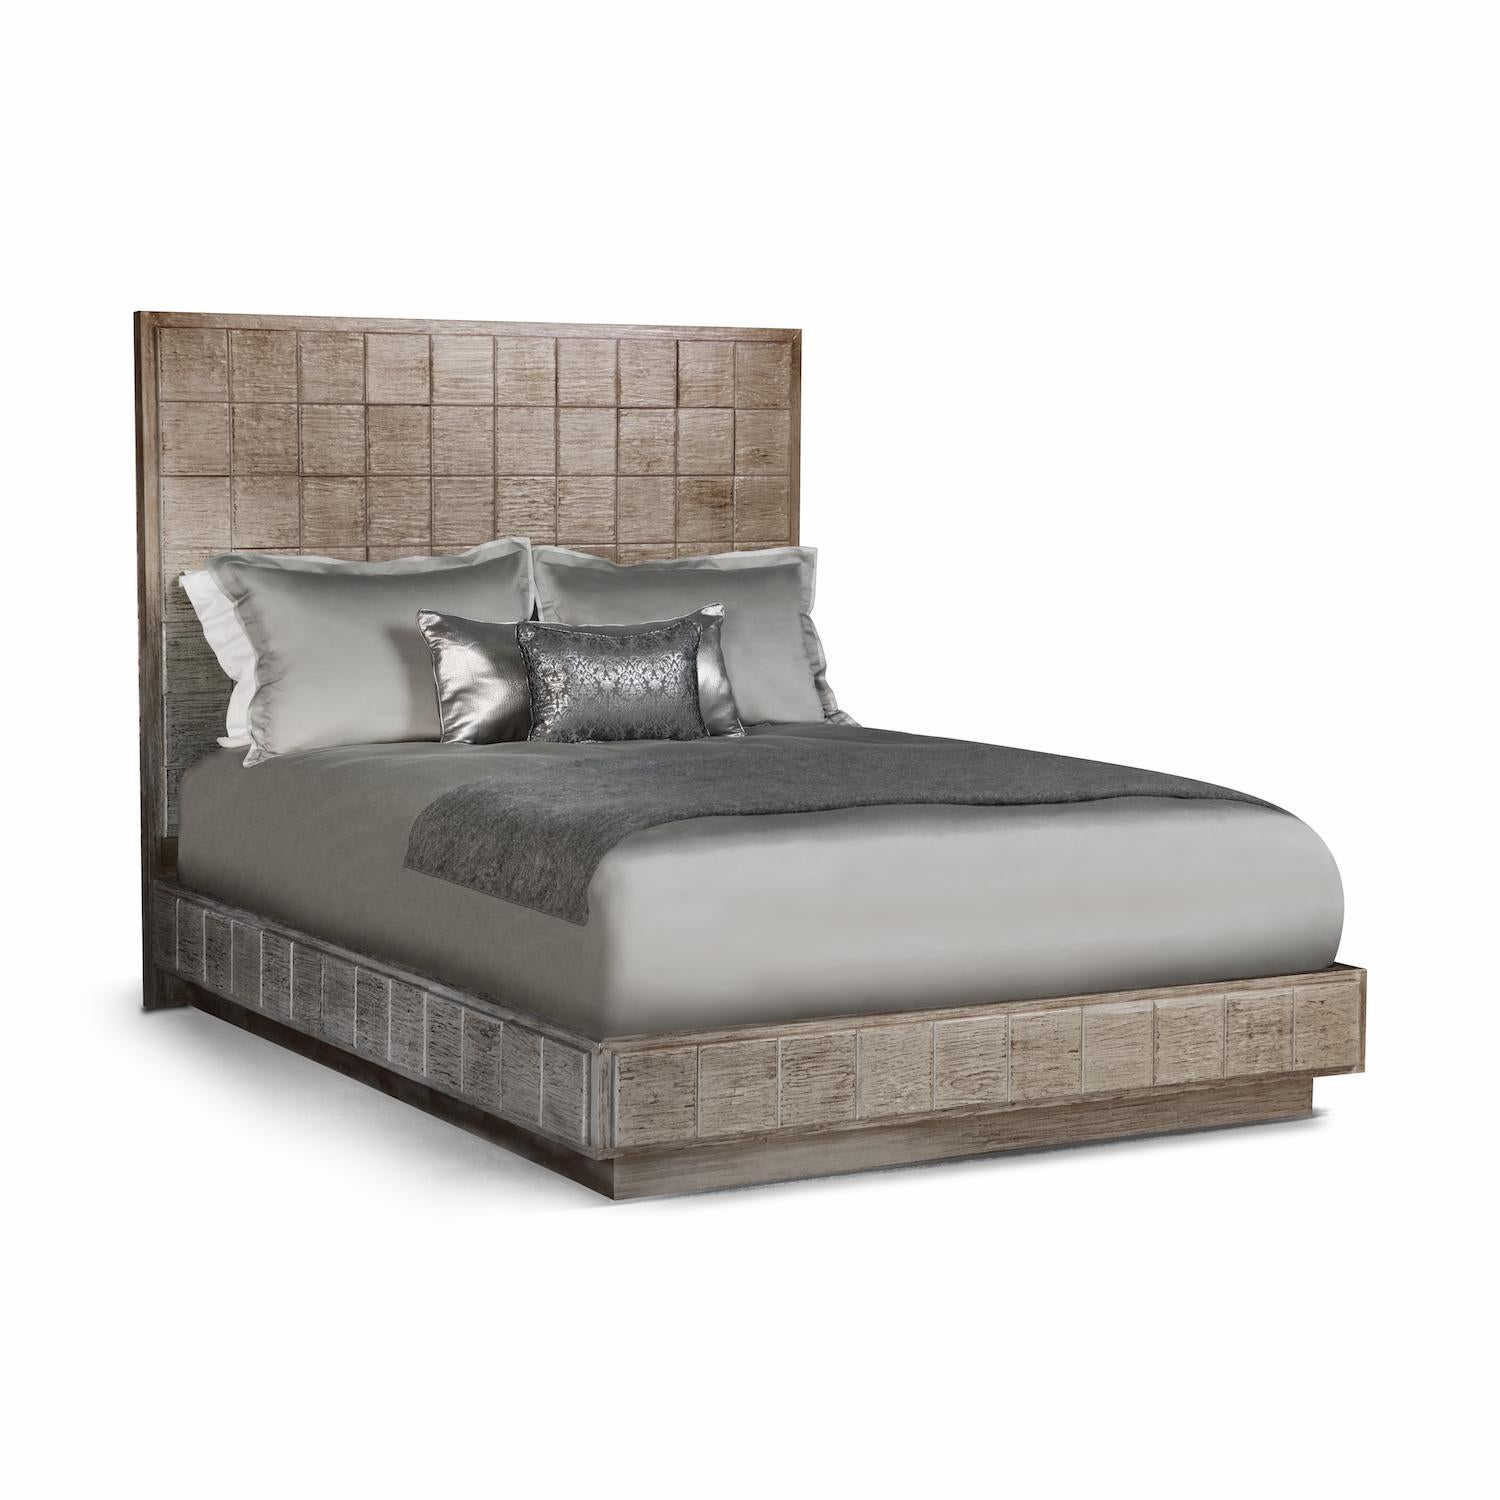 Dramatic and extremely refined, the Mulholland bed is a Classic piece, with a modern, rustic, appeal. The wooden headboard and platform are constructed of individually hand-finished and placed square wooden panels. The Mulholland collection bed is a